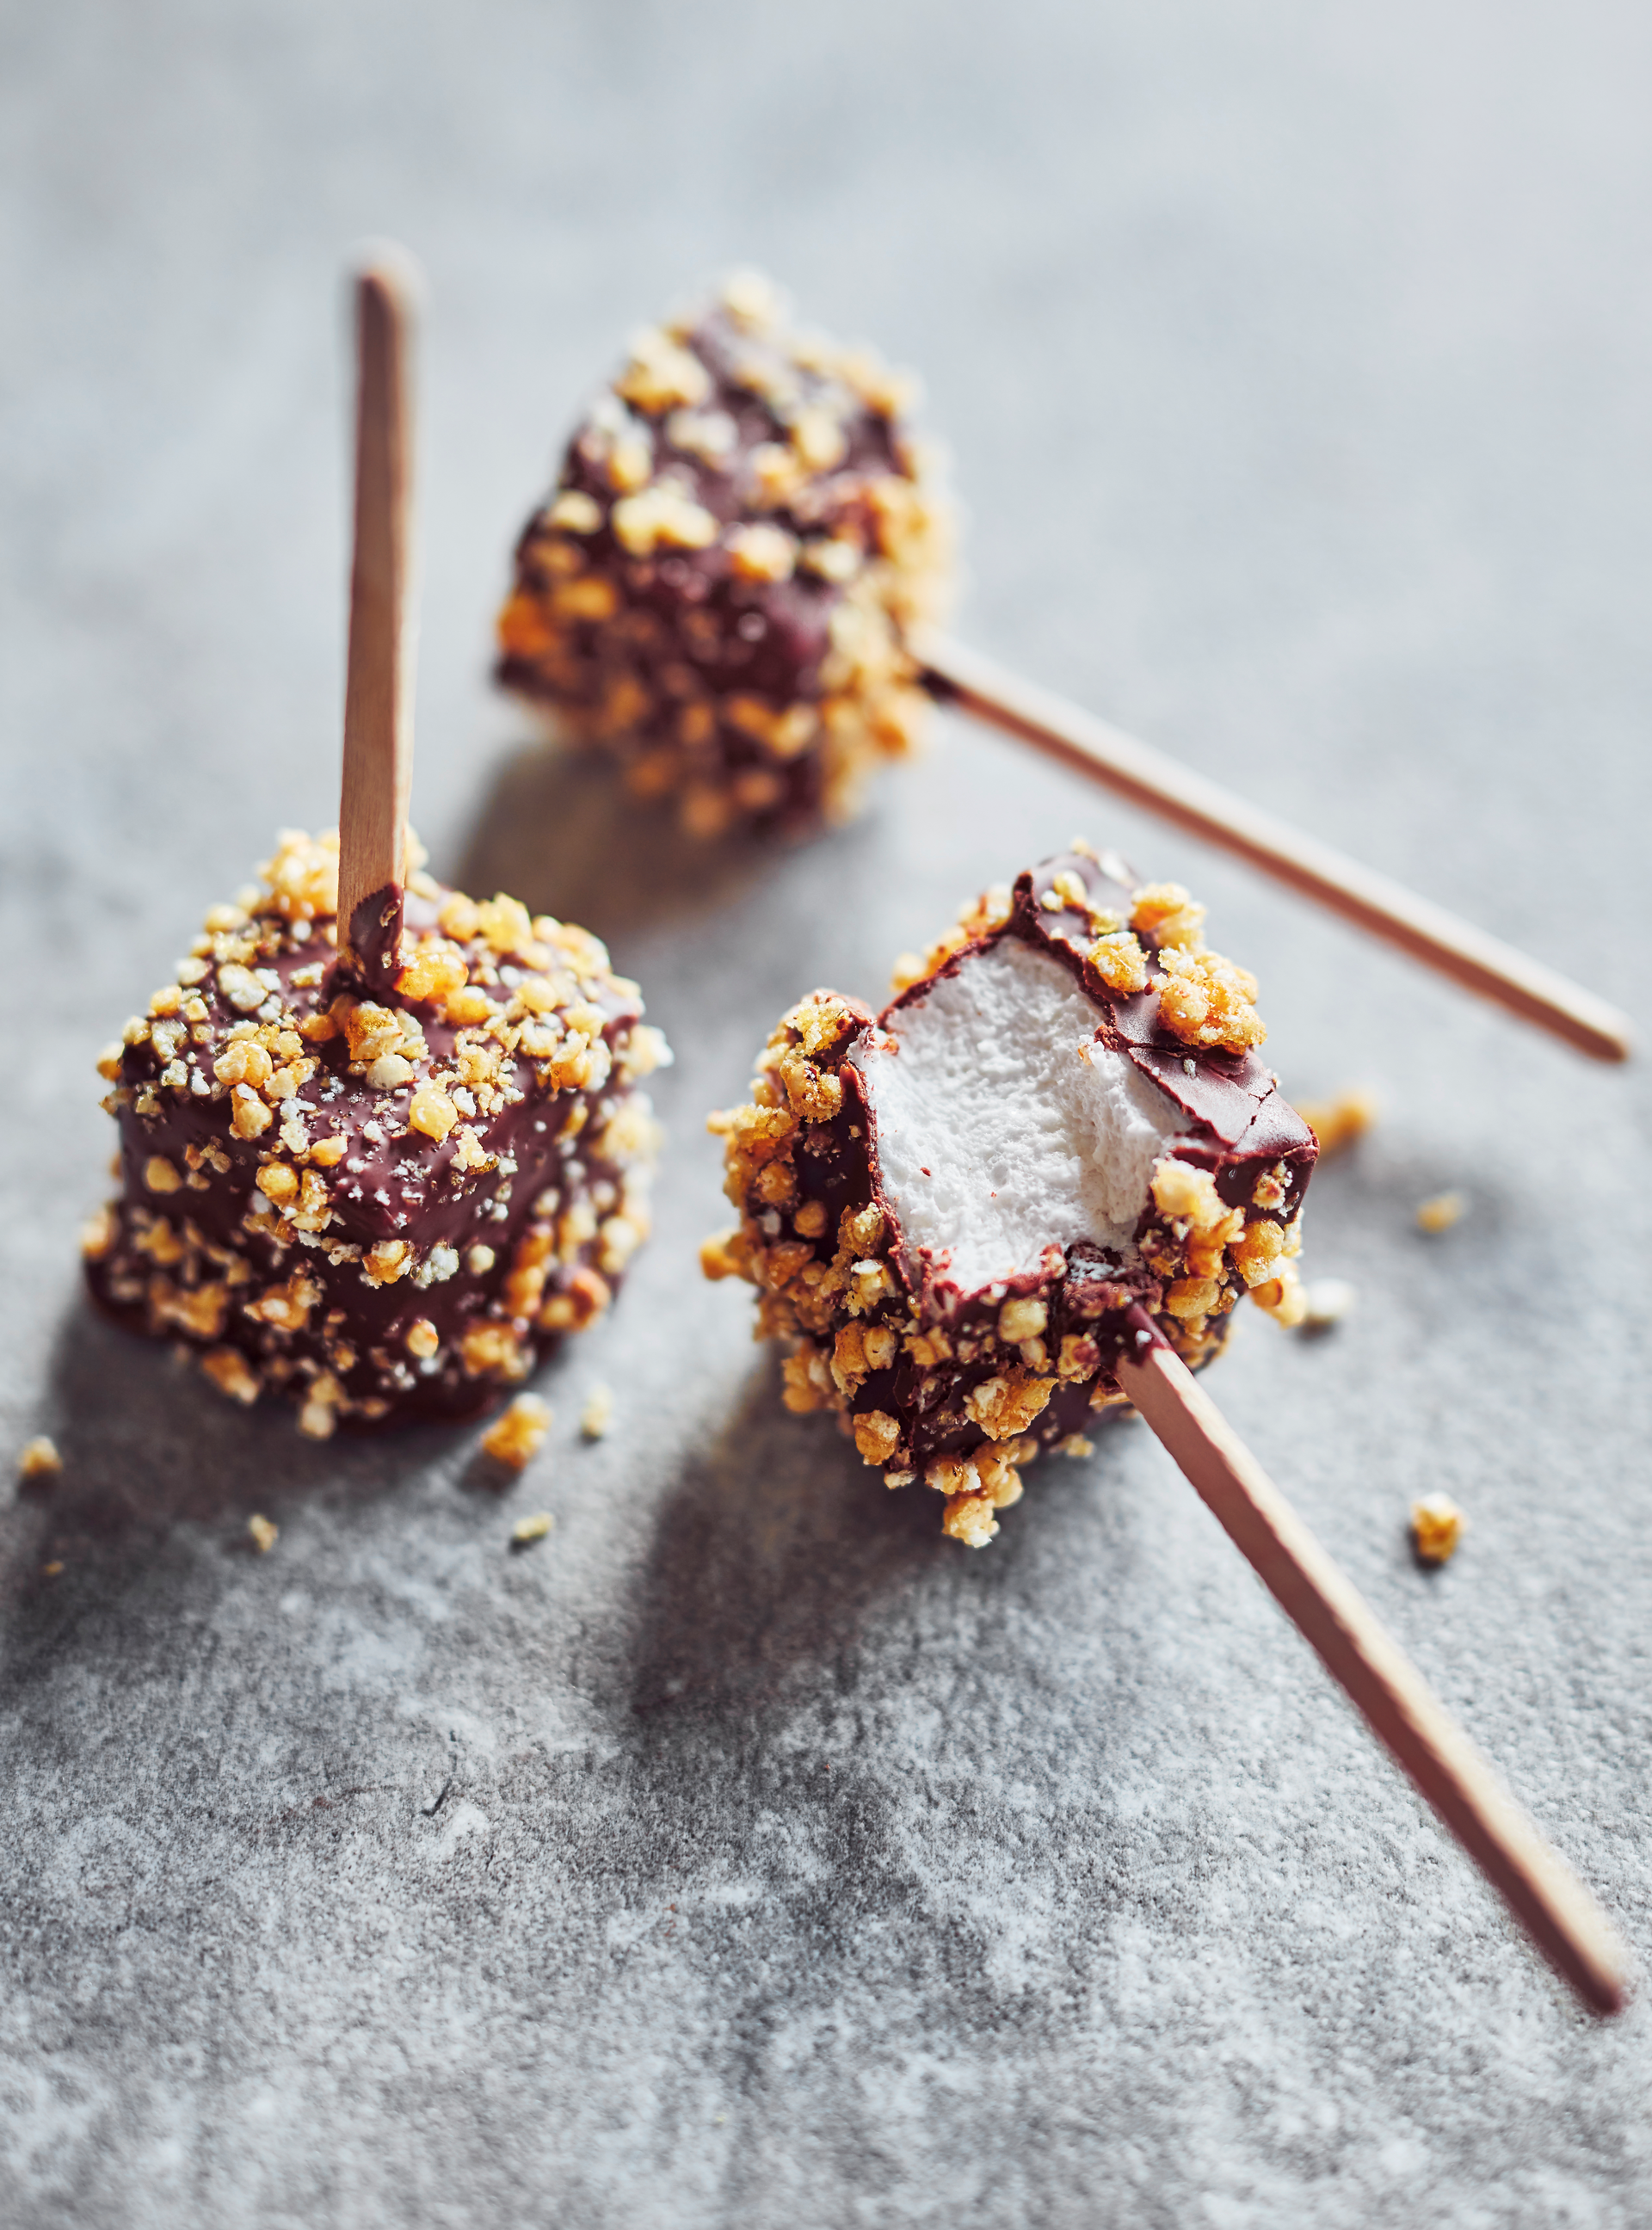 Chocolate-Covered Marshmallows with Crispy Quinoa